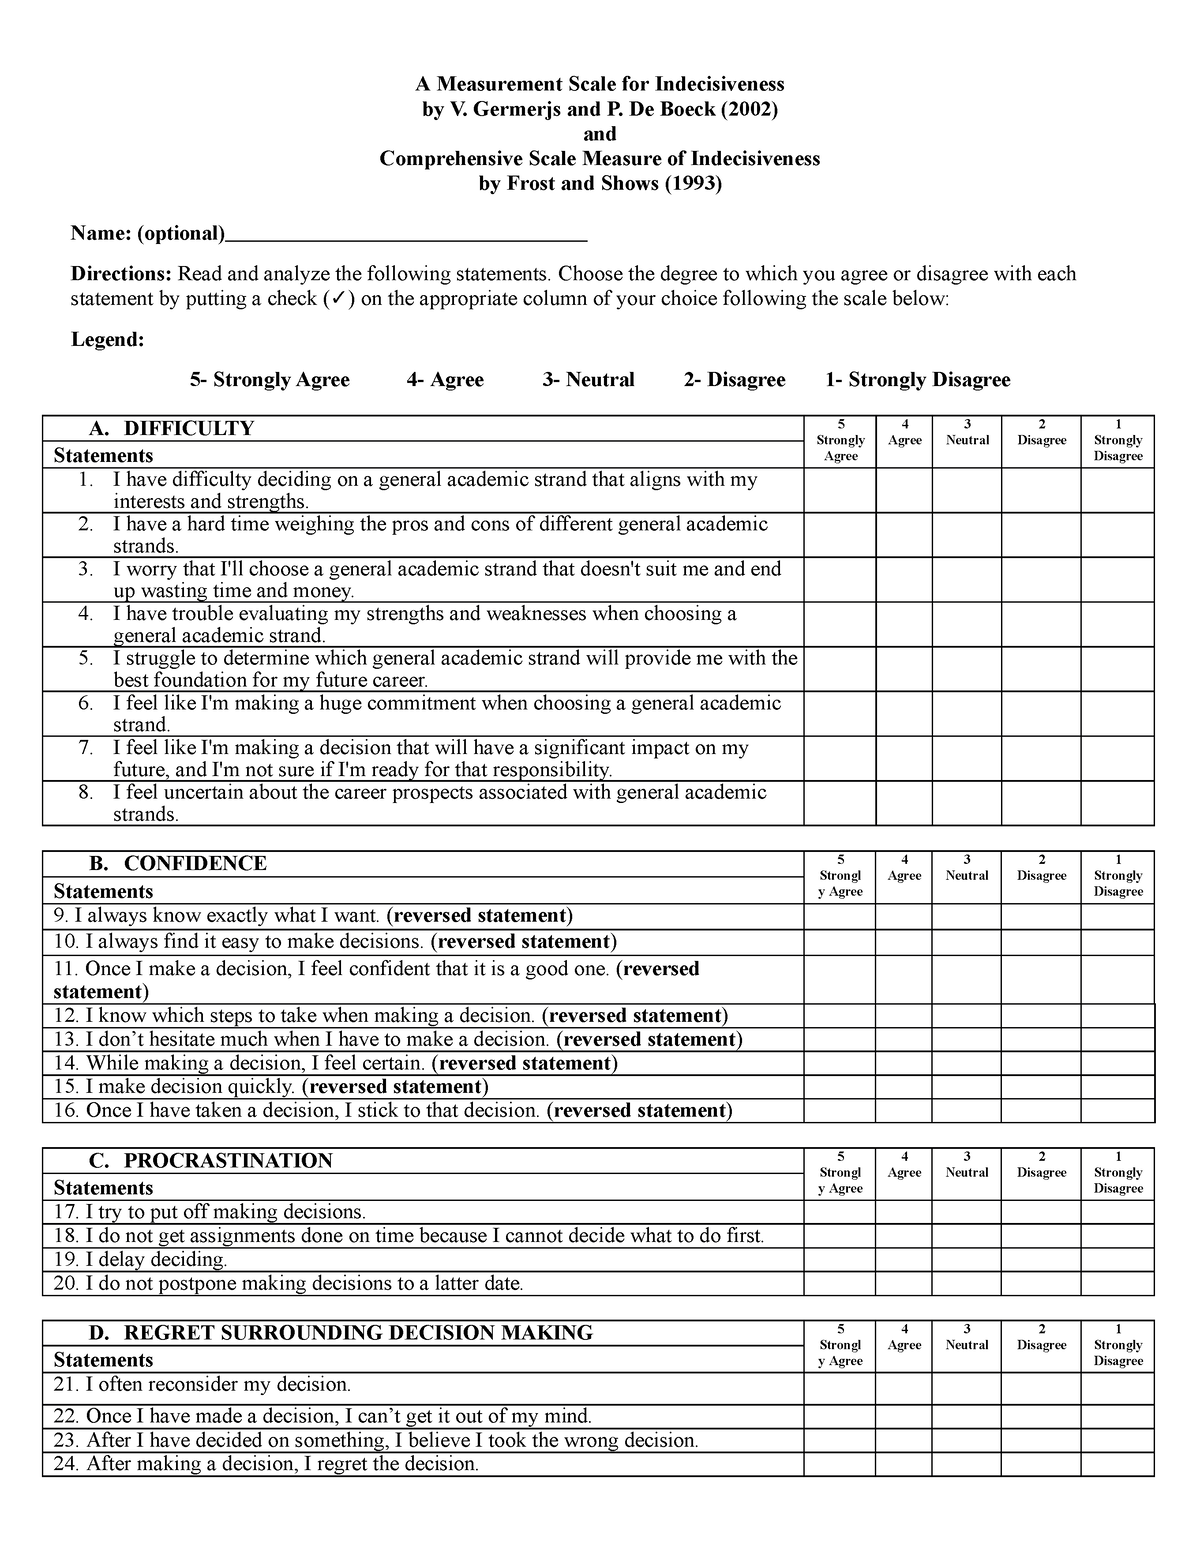 Group-1-Research-Questionnaire (1) - A Measurement Scale for ...